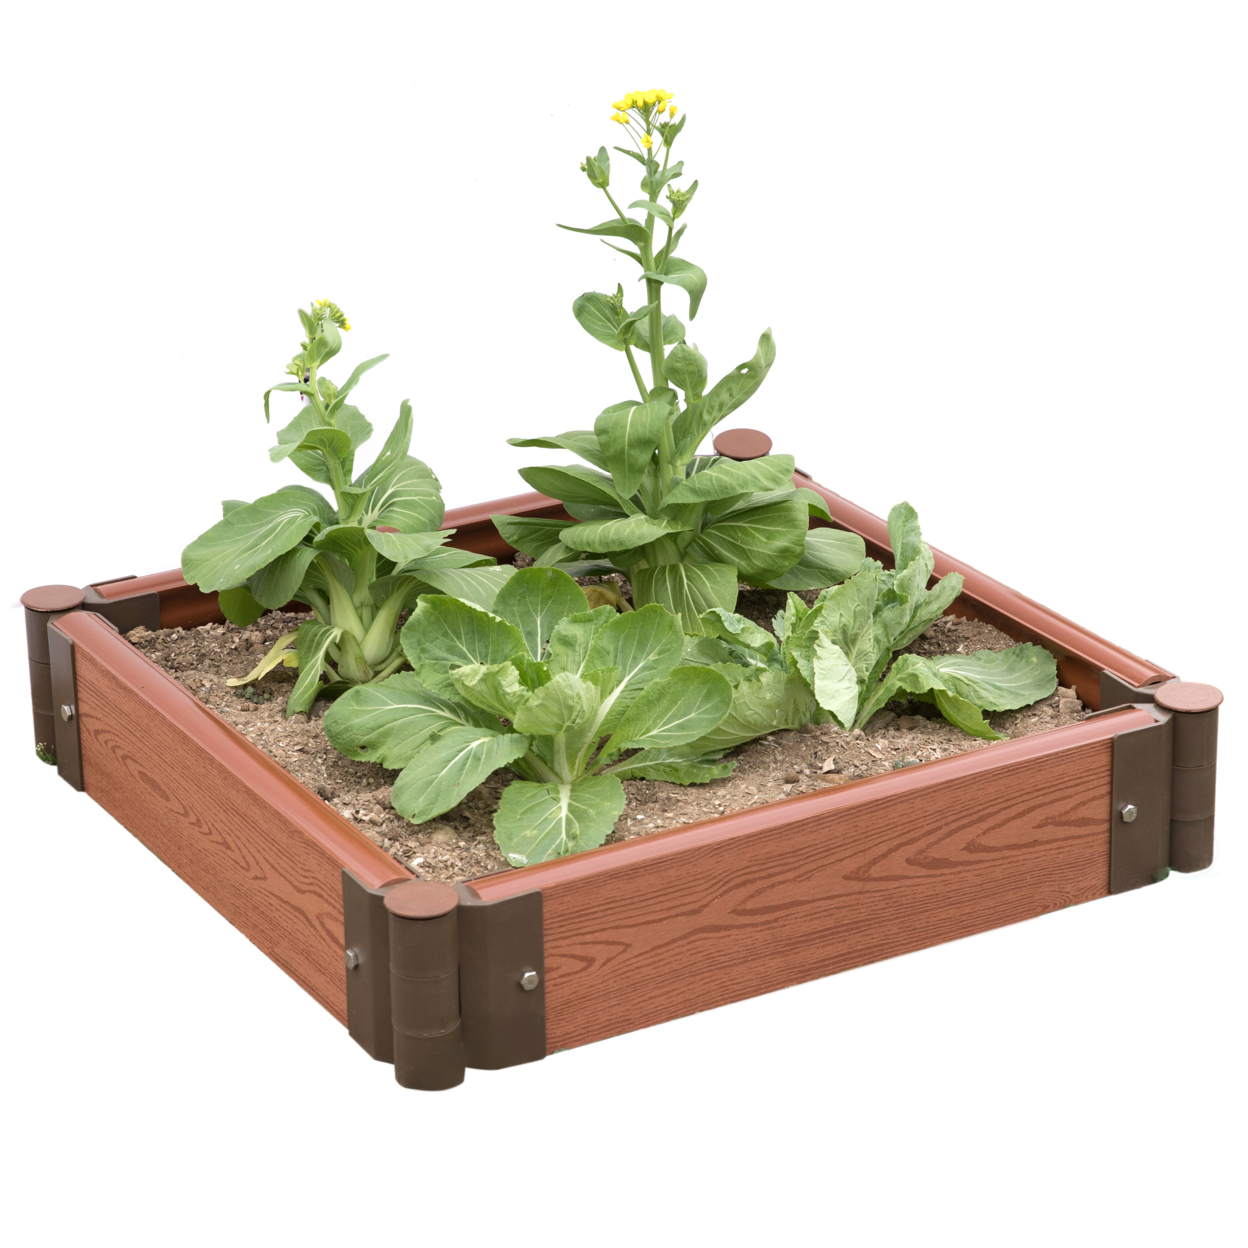 Classic Traditional Durable Wood- Look Raised Outdoor Garden Bed Flower Planter Box - small set of 4